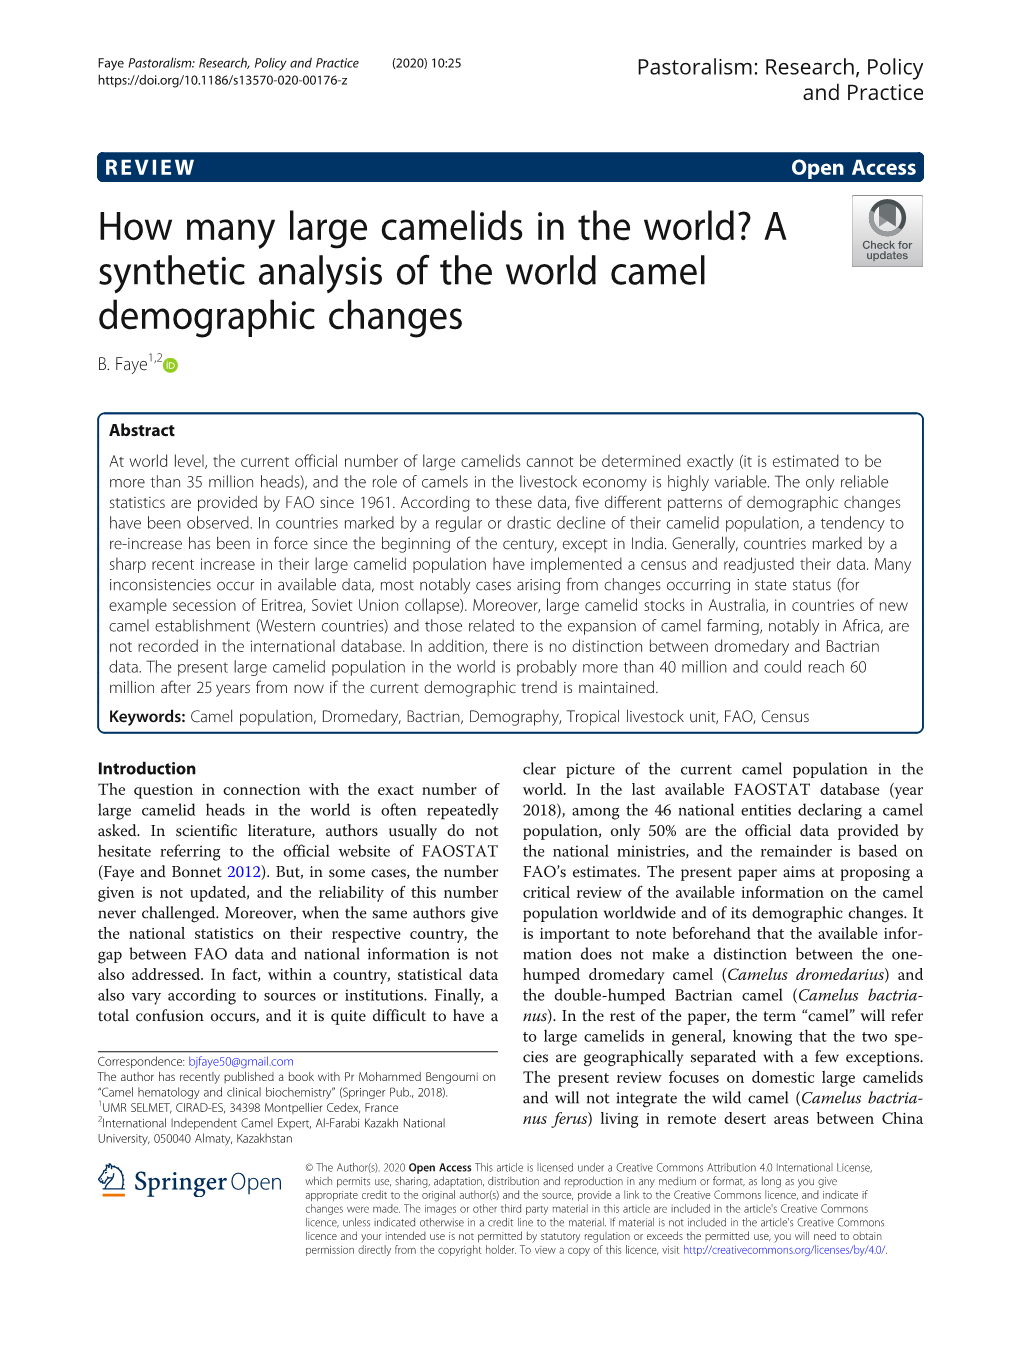 How Many Large Camelids in the World? a Synthetic Analysis of the World Camel Demographic Changes B